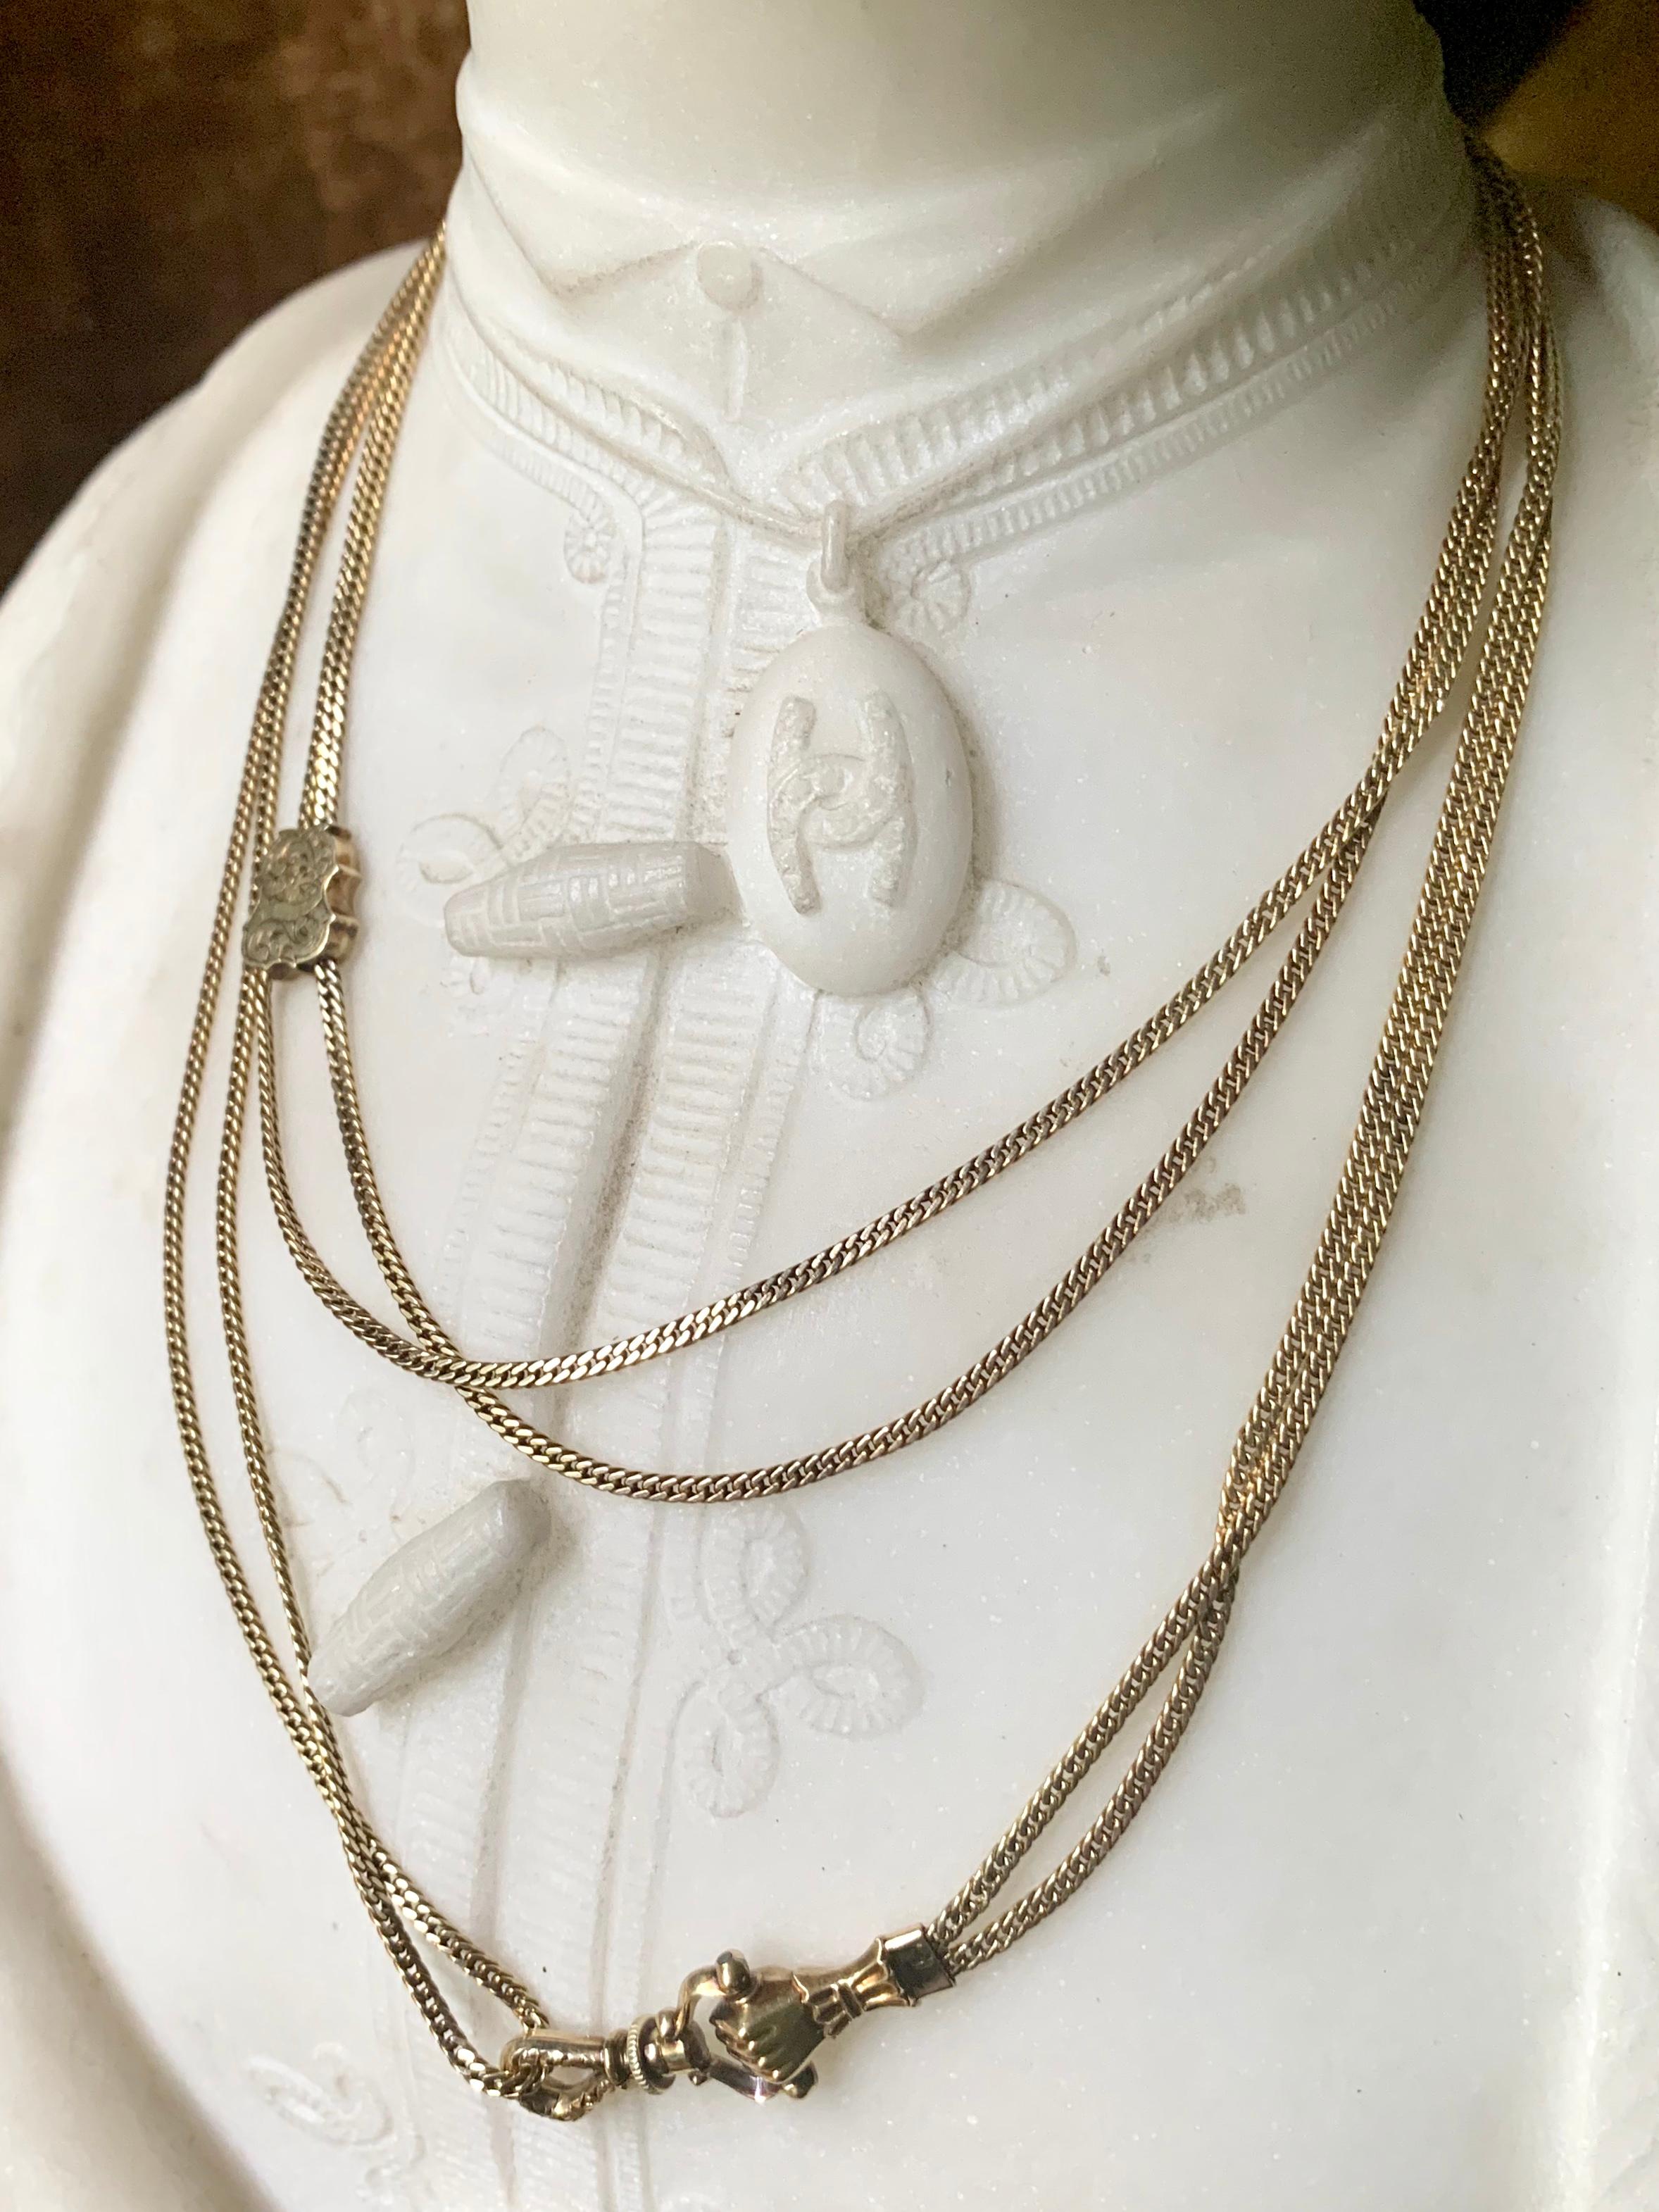 Exceptionally Long Antique 18K Gold Mano Sautoir Slide Chain Necklace Circa 1840 For Sale 7